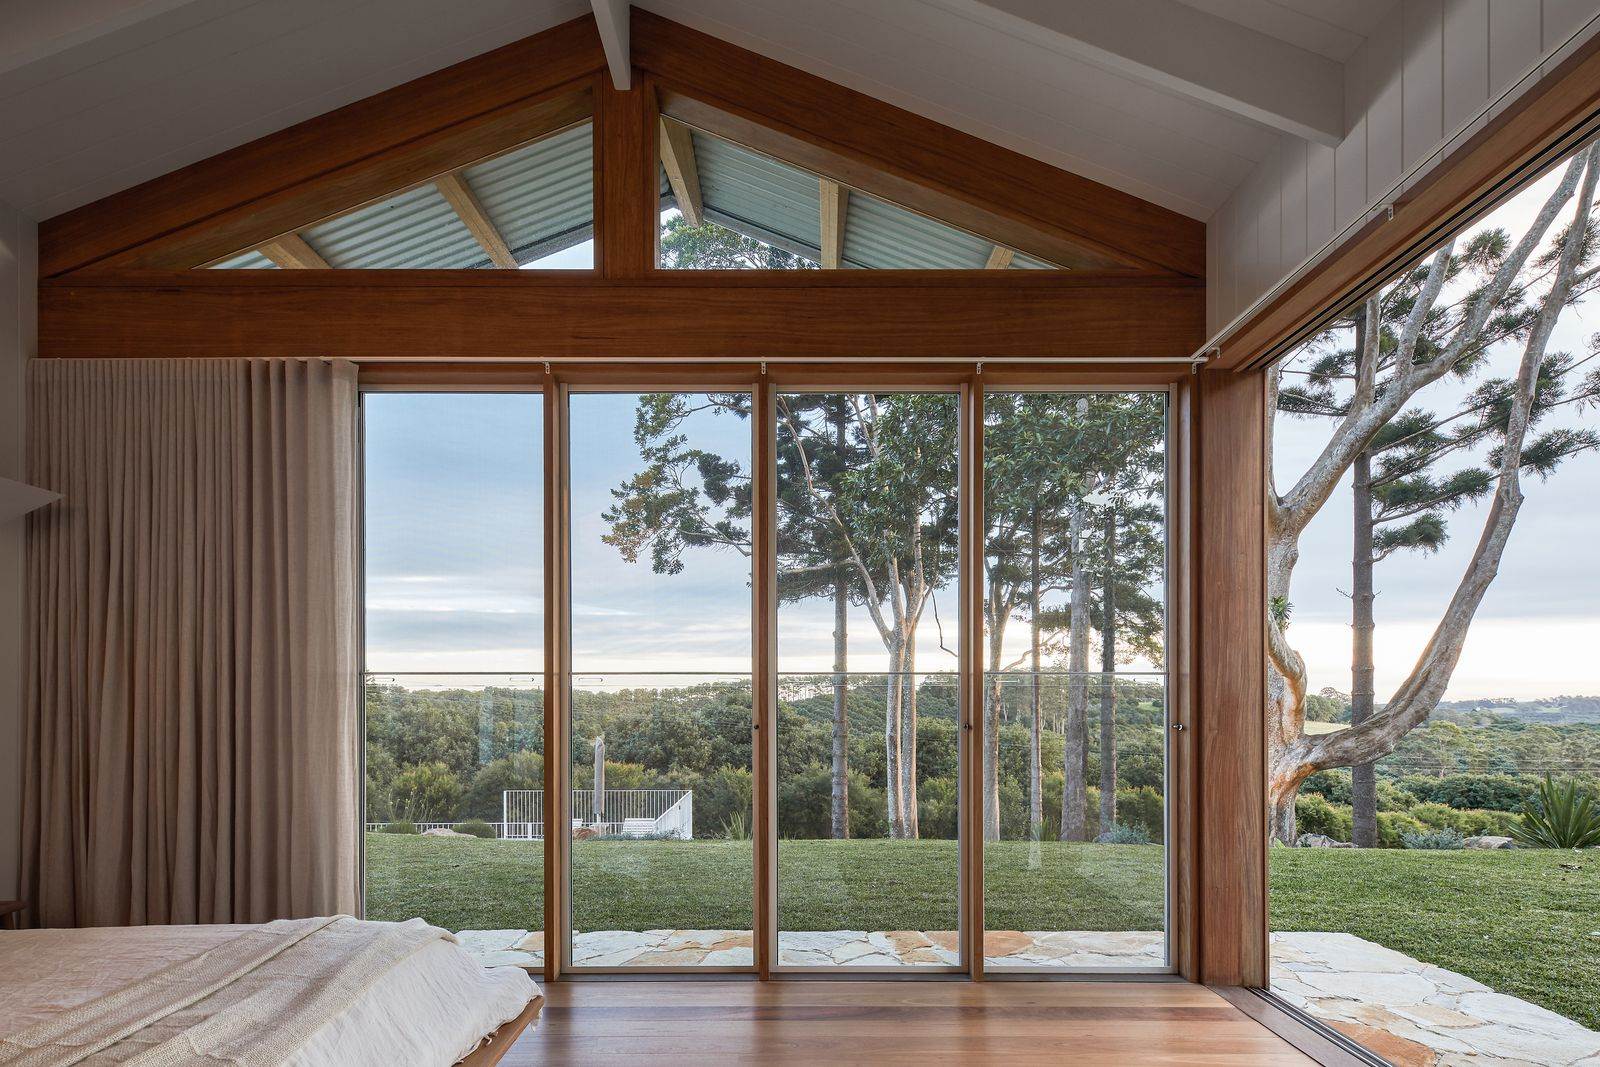 The Caretaker's by Aphora Architecture showing the view out from the bedroom